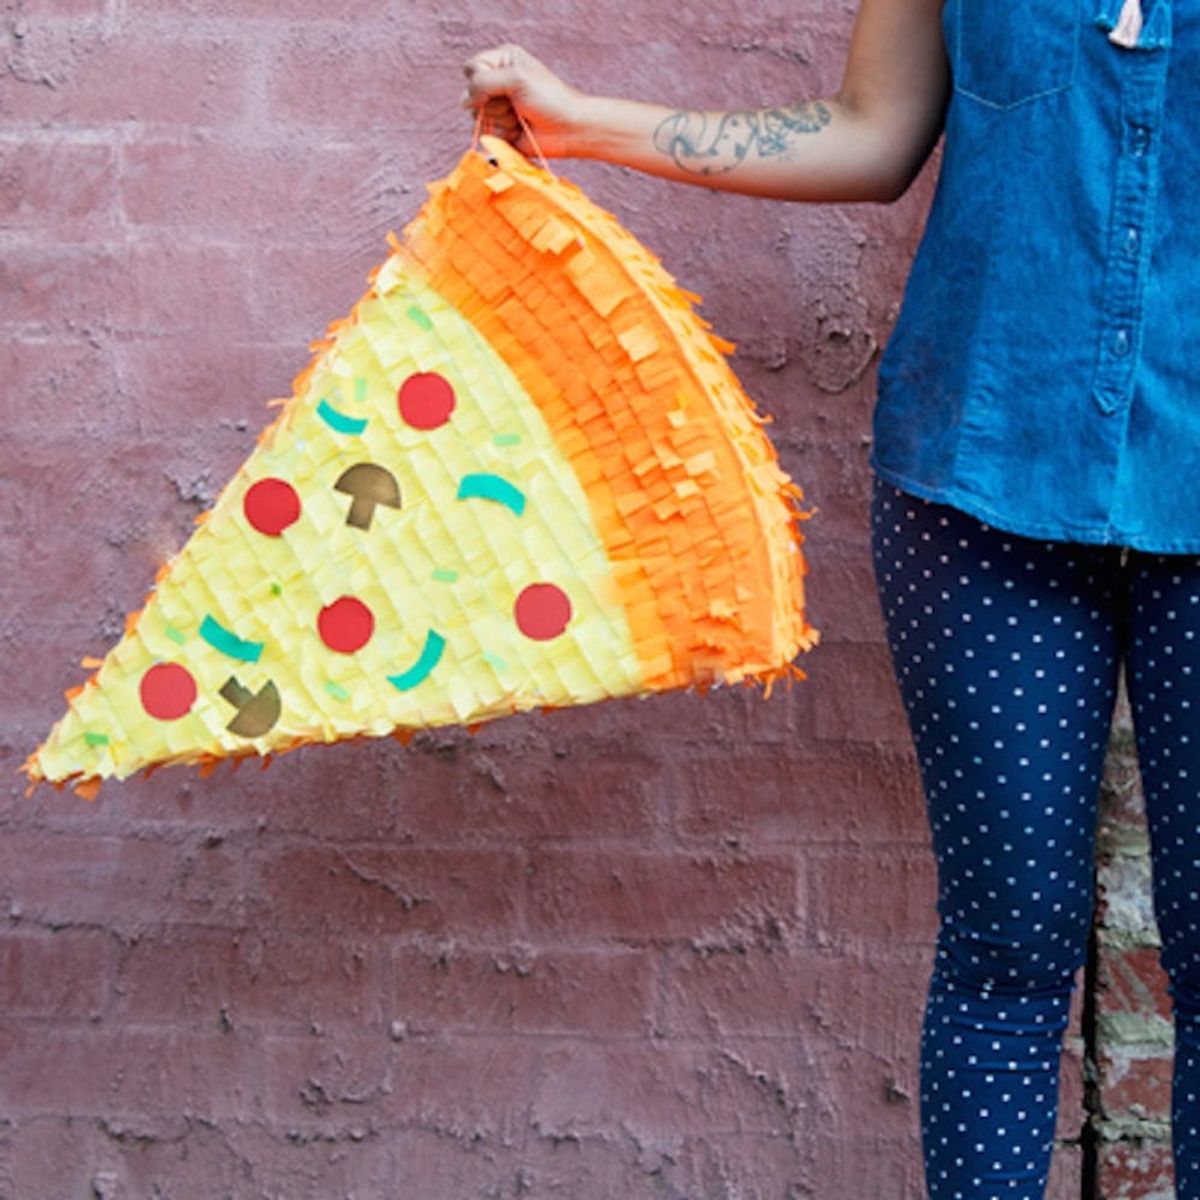 17 Grown-Up Pizza Party Essentials for the Ultimate 30th Birthday Party